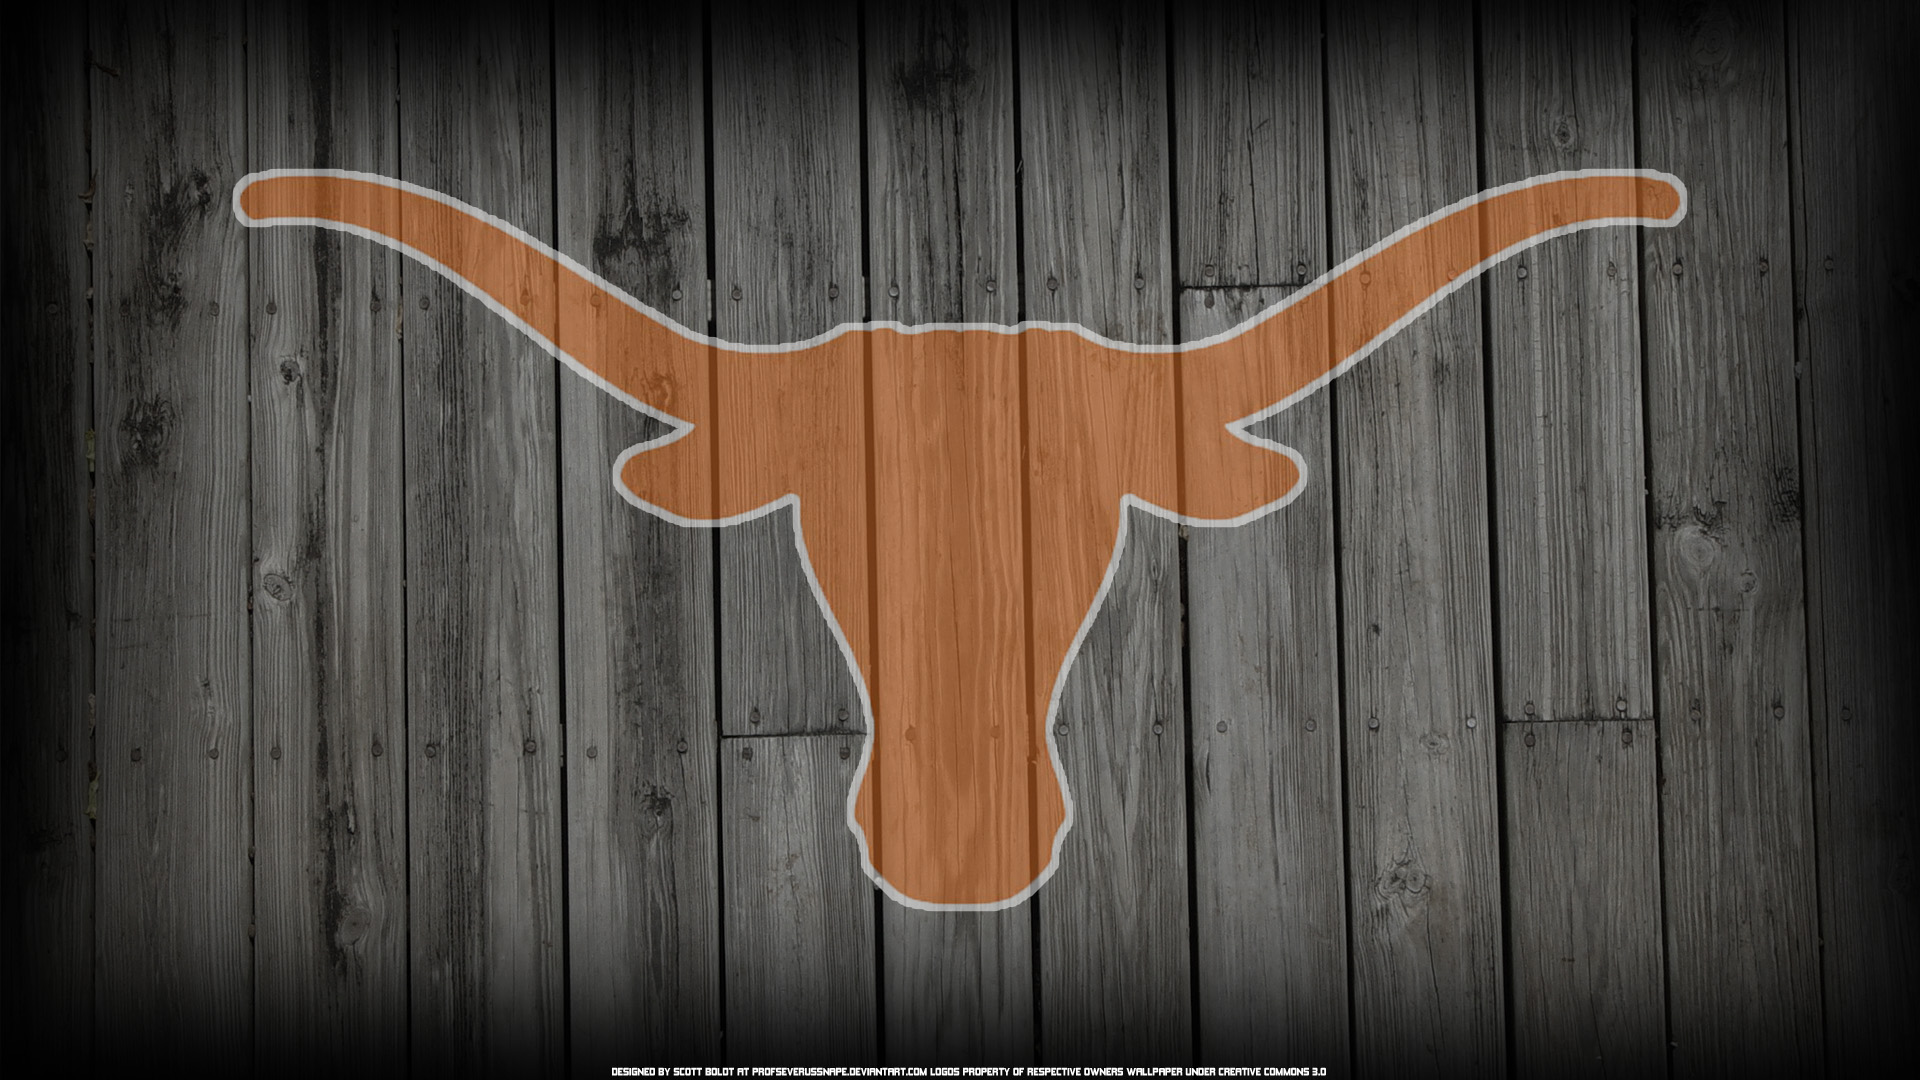 Texas Longhorns Logo on Wood Background by ProfSeverusSnape